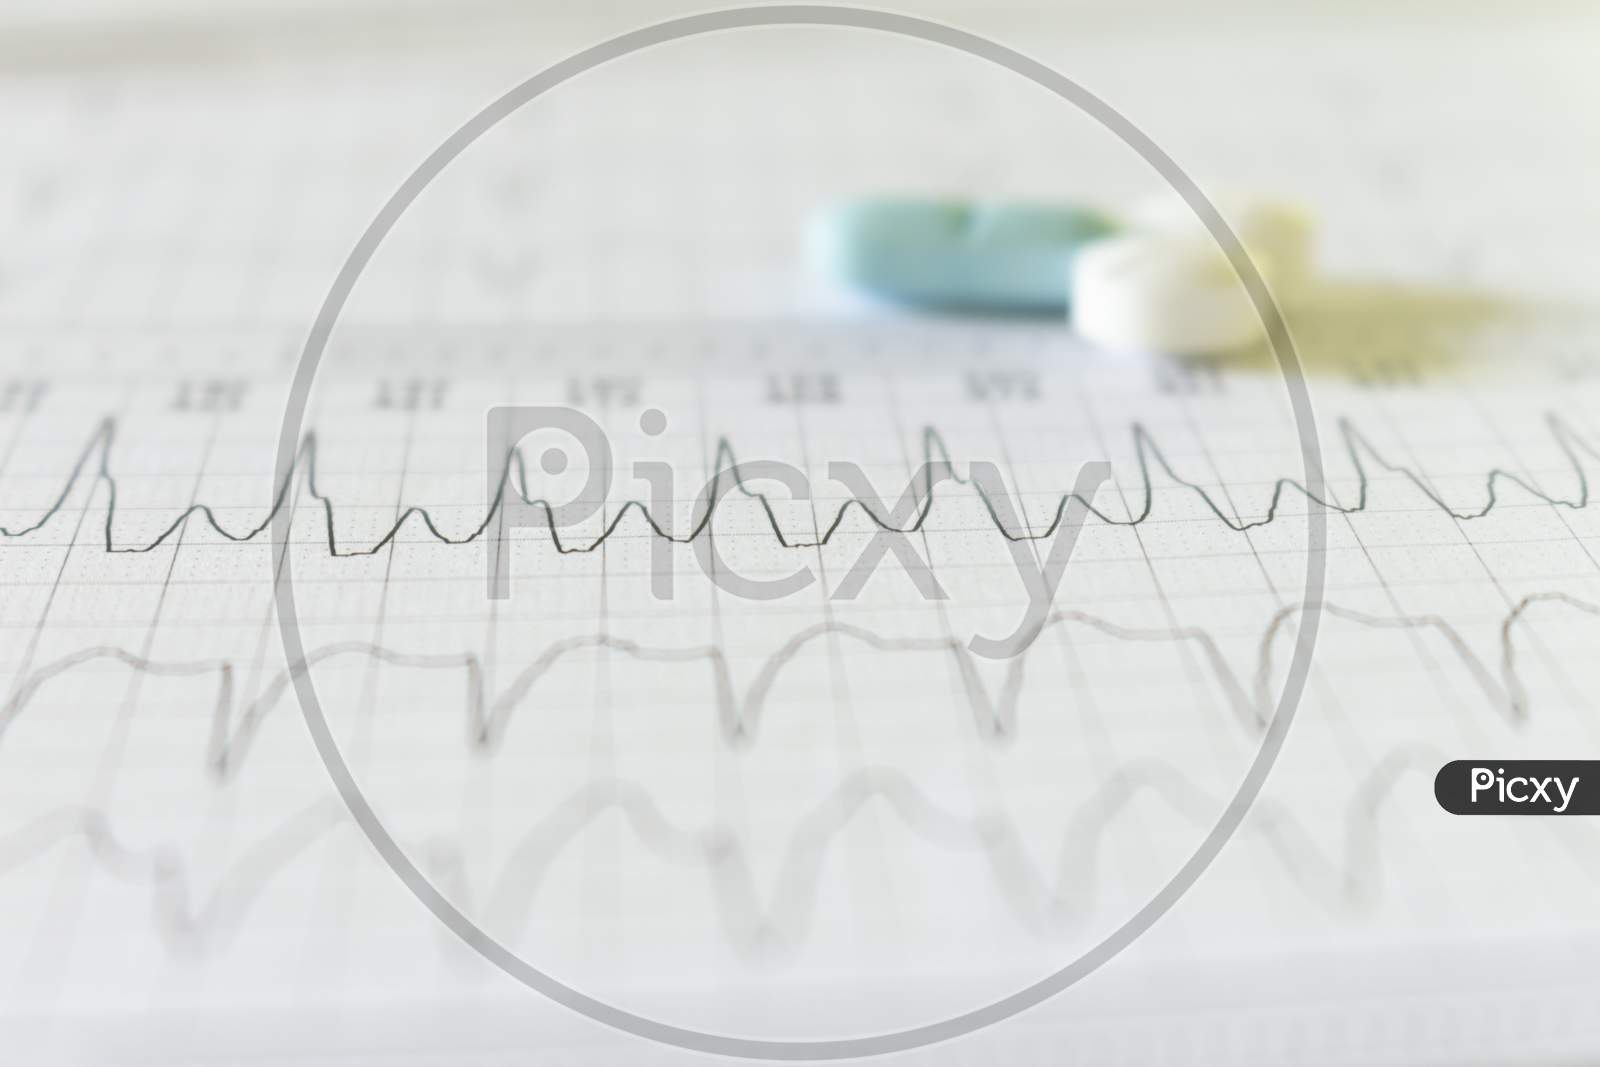 White, Blue And Light Blue Pills On An Electrocardiogram Paper. Medications For Cardiac Patients. Heartbeats Recorded On Paper.